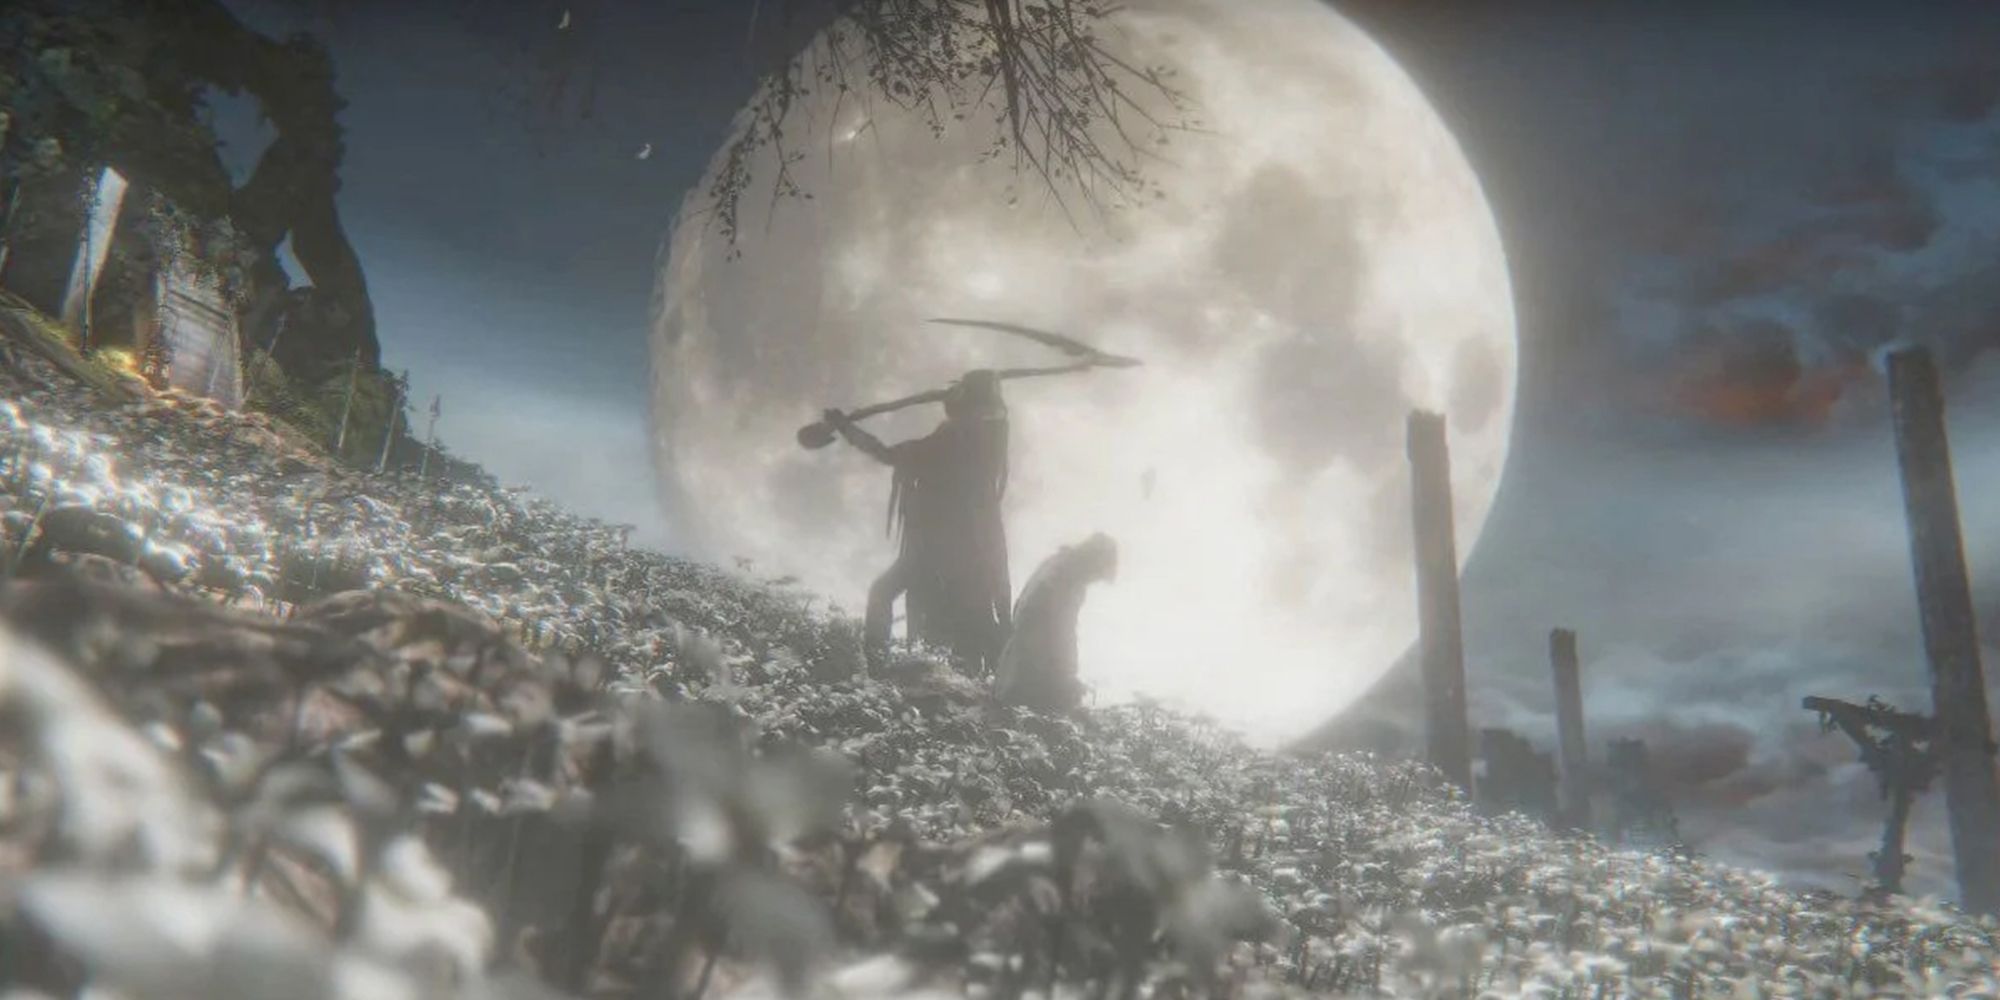 Bloodborne - Gerhman Cutting Of The Hunters Head To Wake Them Up From The Hunter's Dream